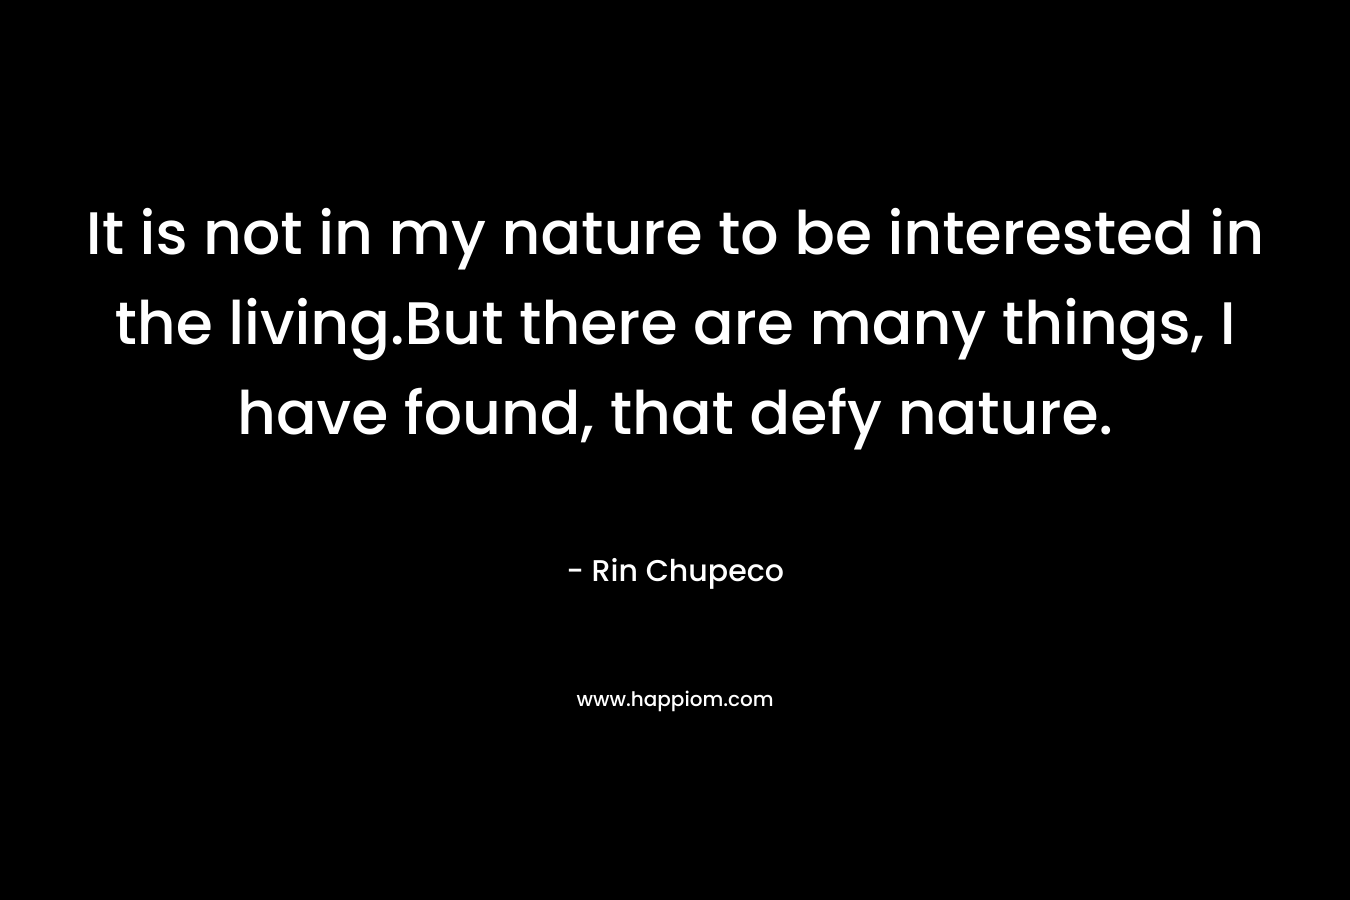 It is not in my nature to be interested in the living.But there are many things, I have found, that defy nature. – Rin Chupeco